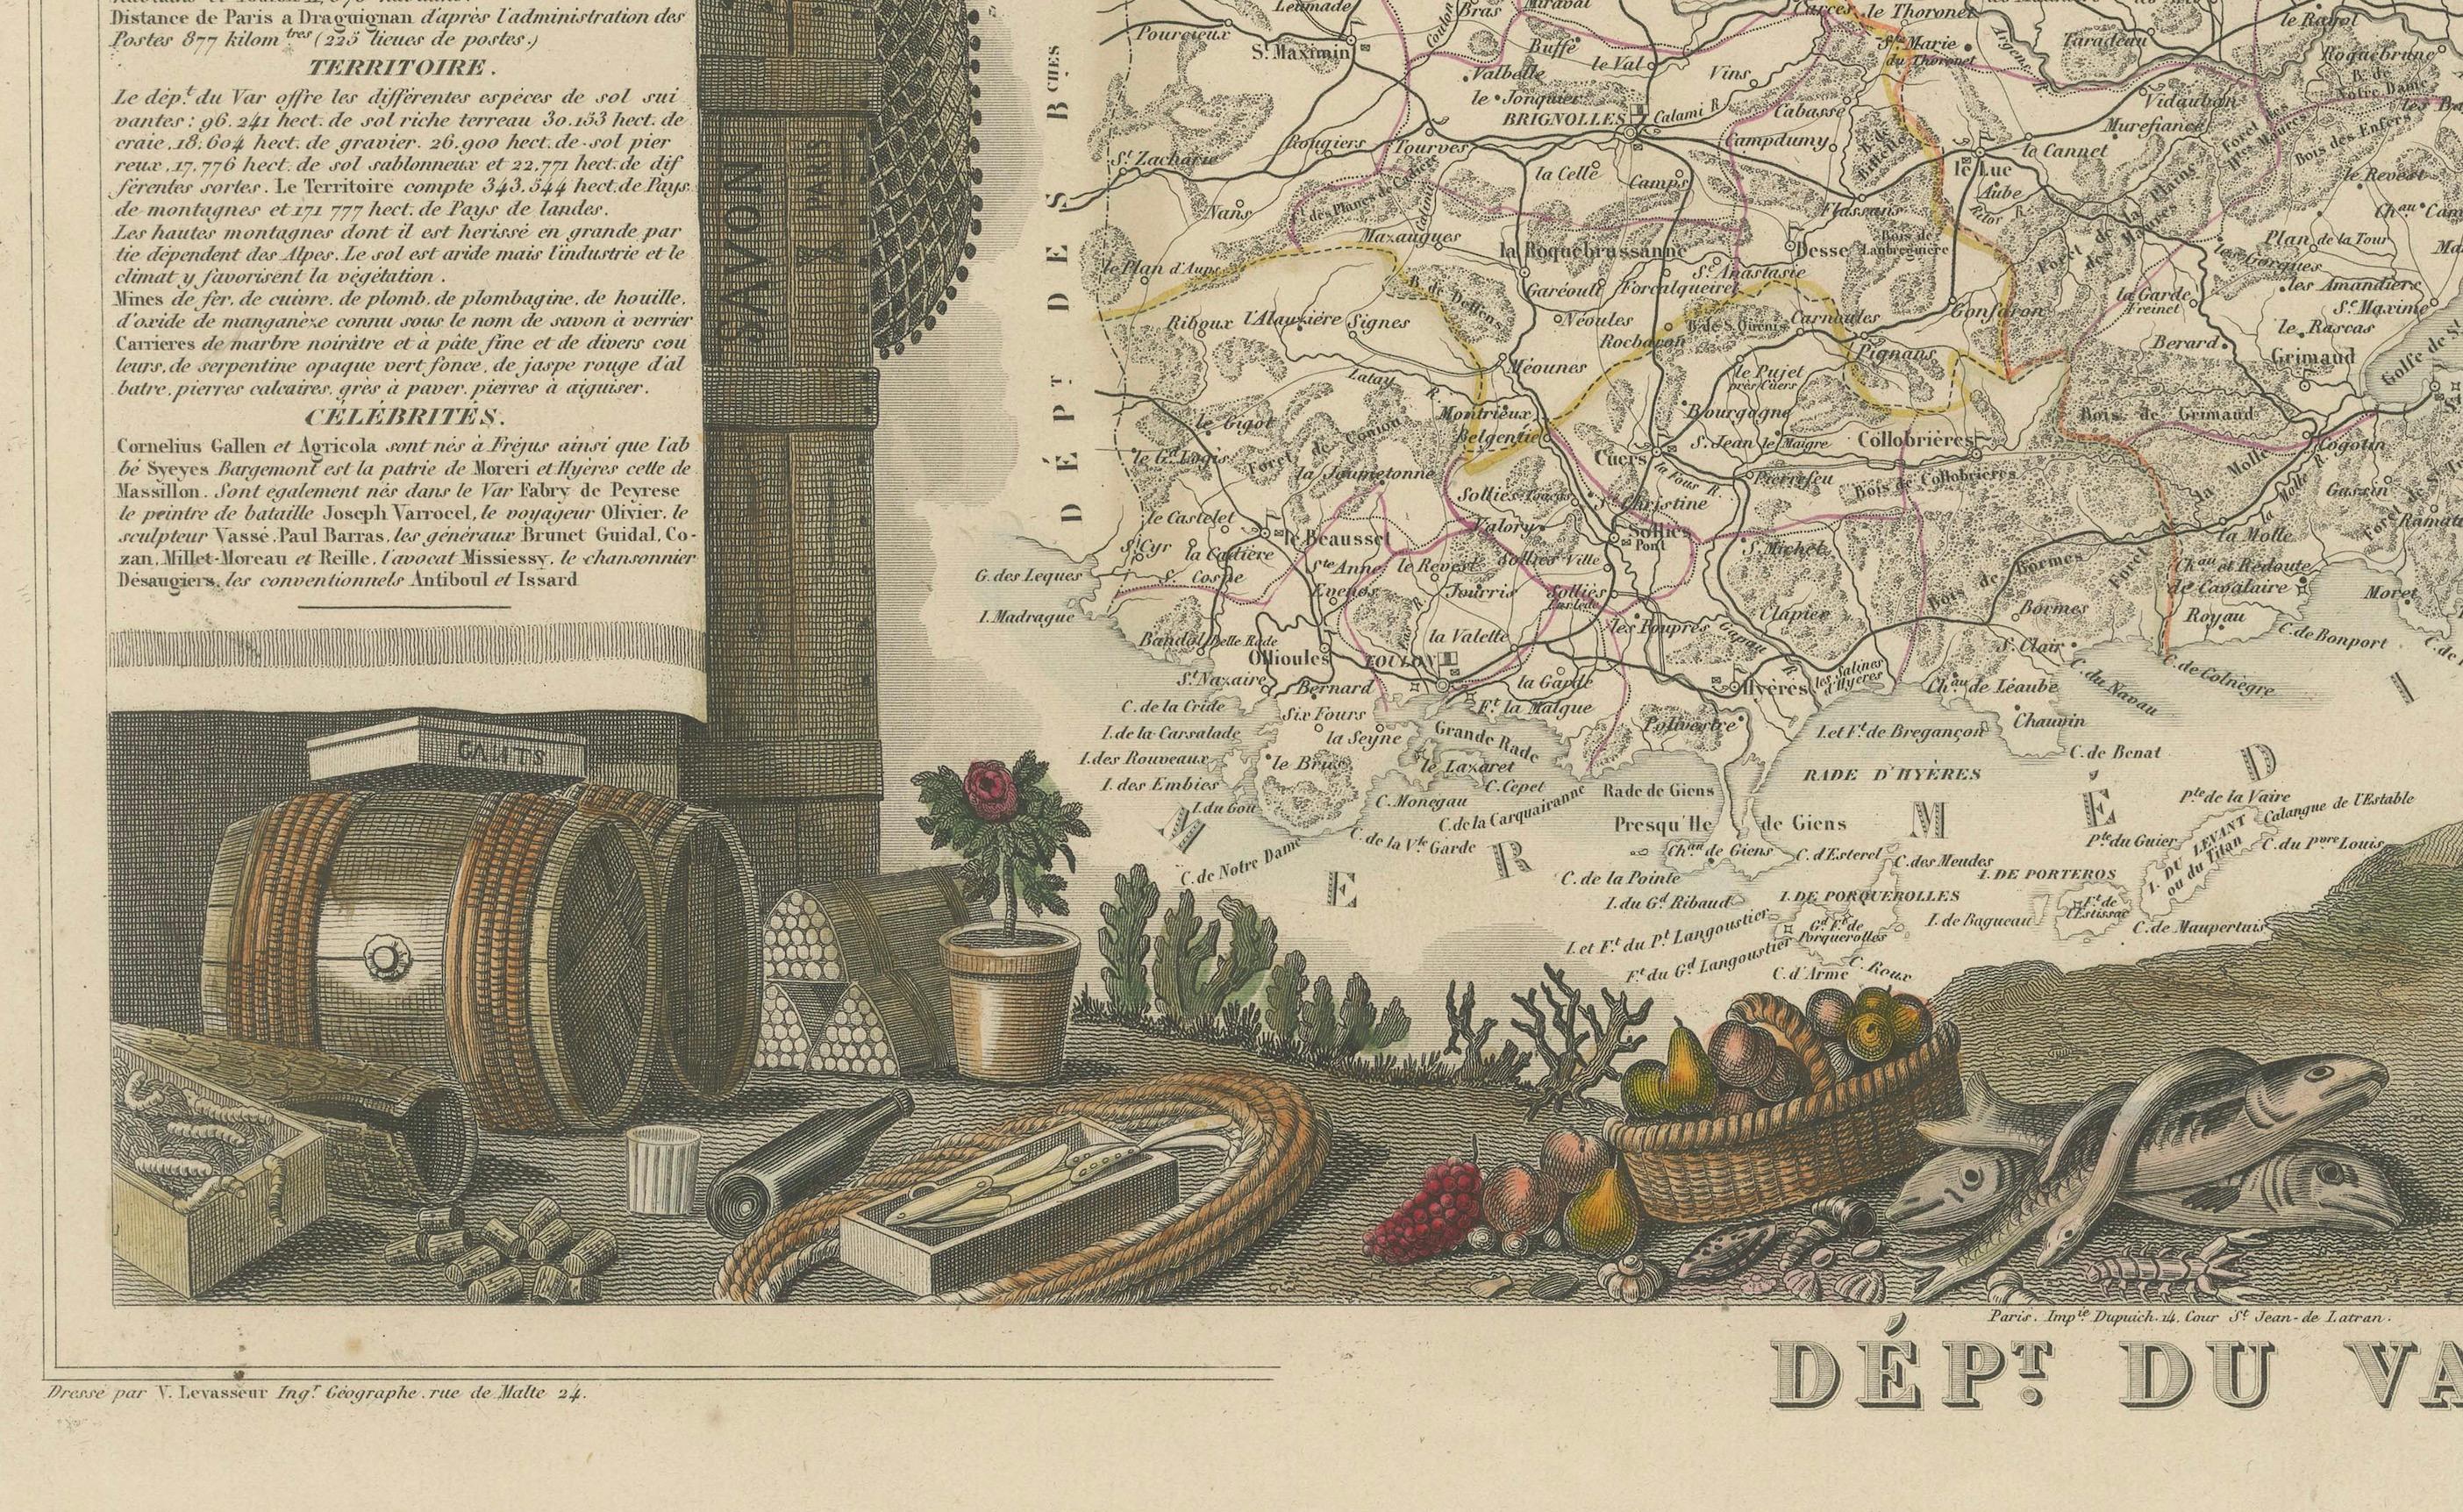 The Illustrated Map of the Var Department from the Atlas National Illustré, 1856 For Sale 1